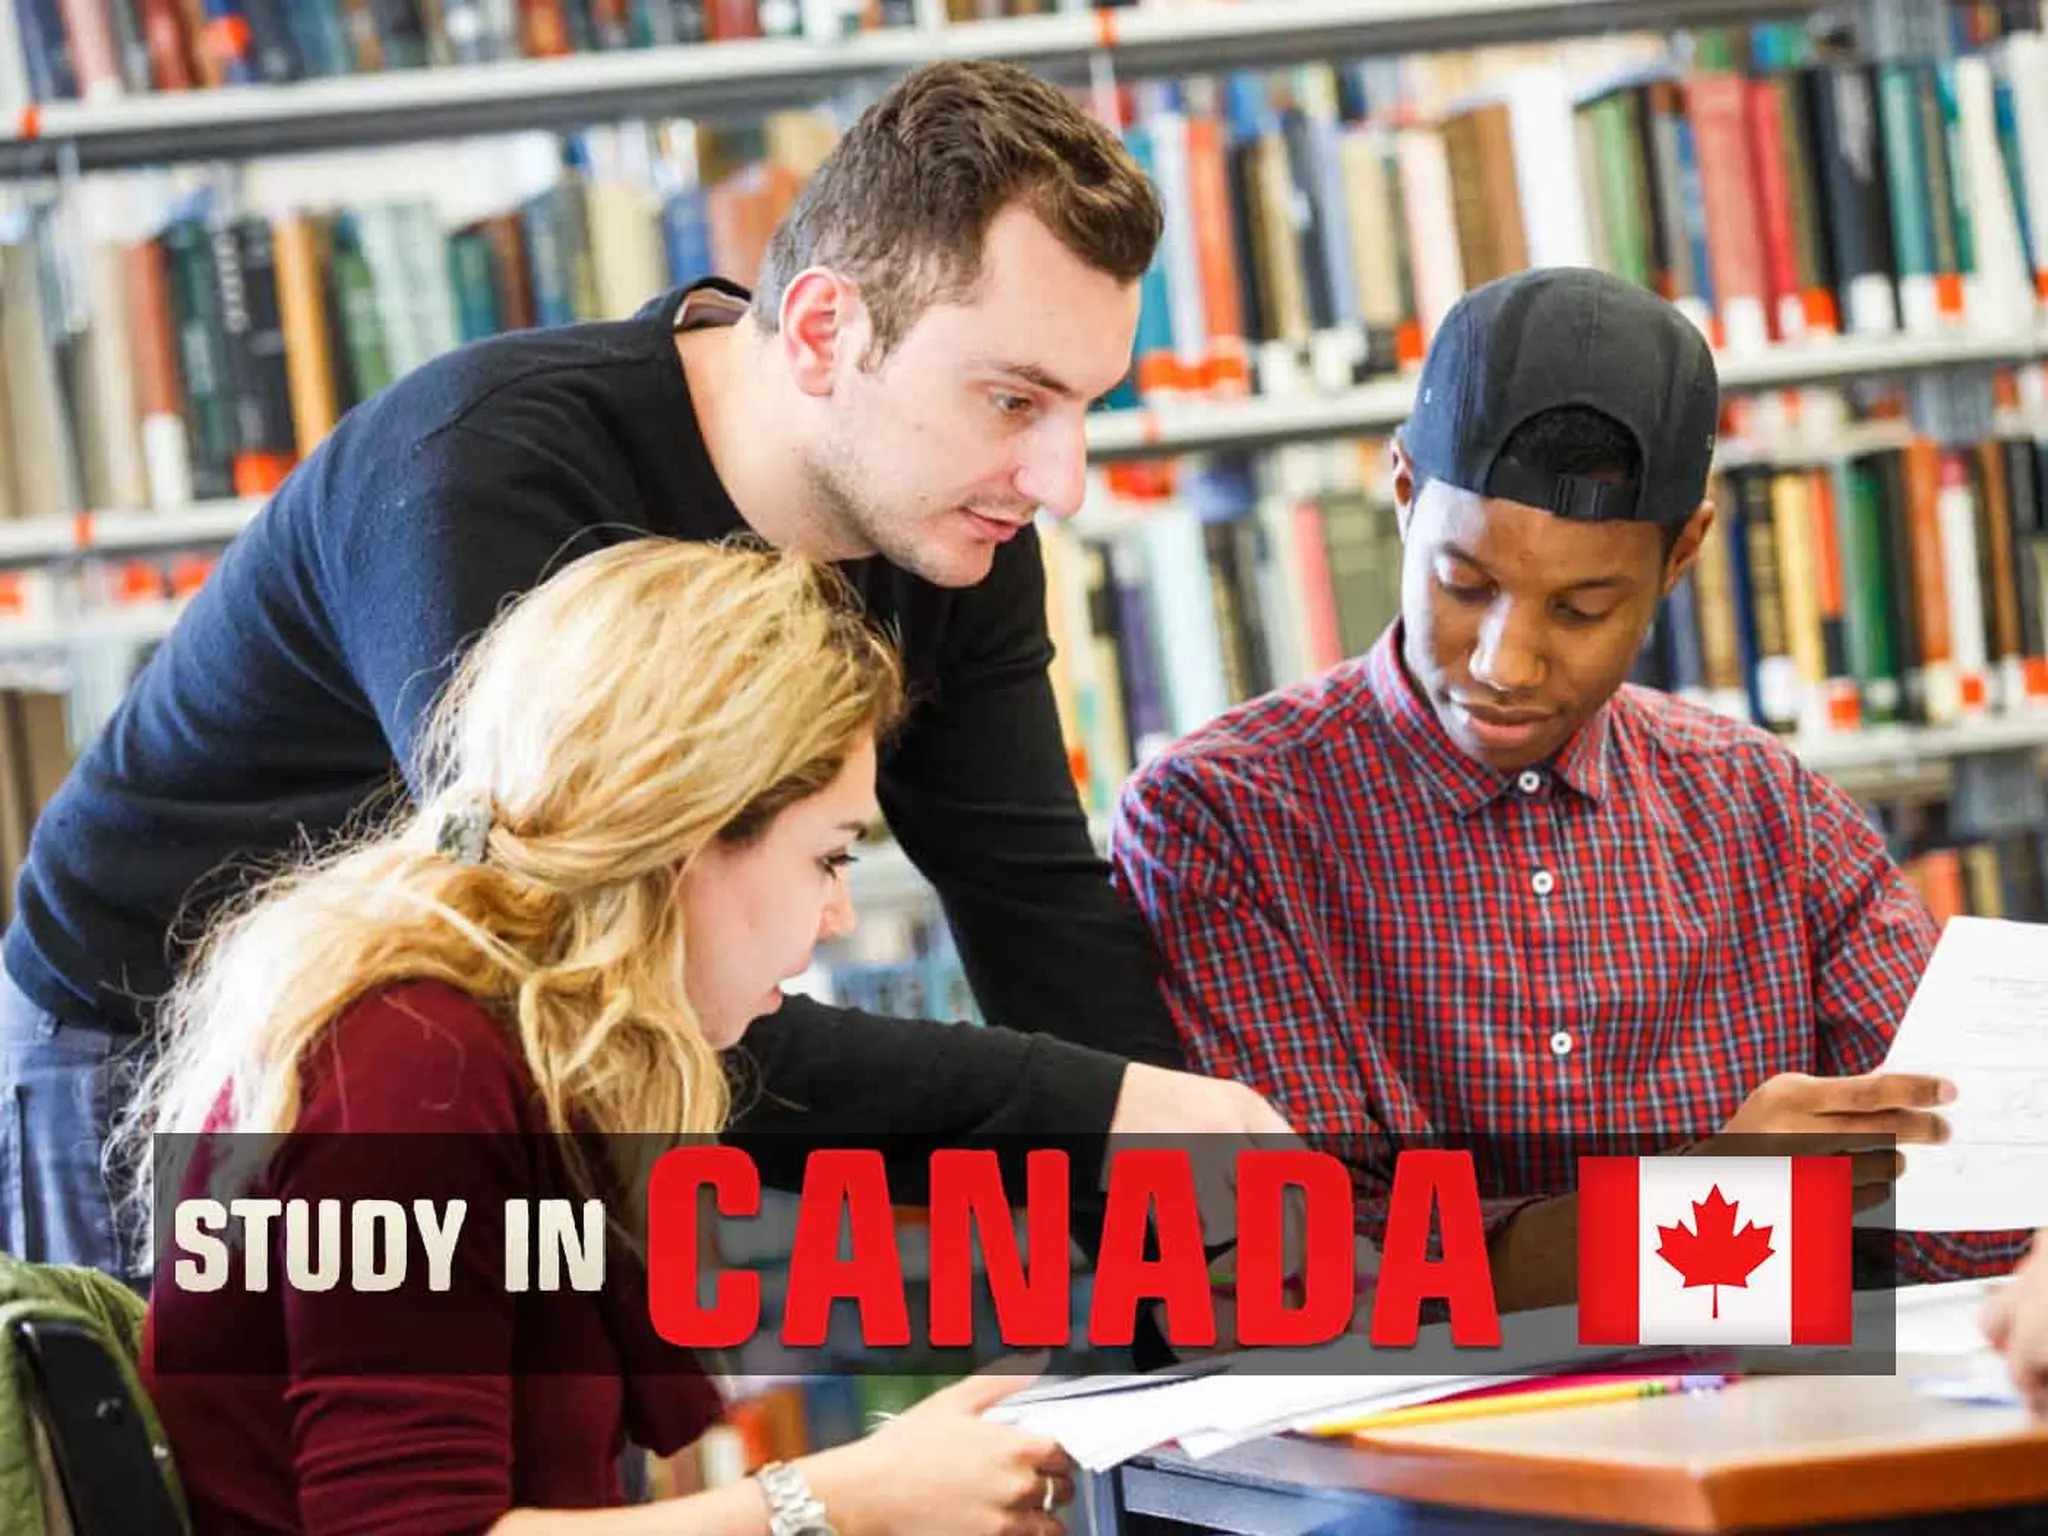 Demands for urgent change in Canada to confront the rising number of foreign students